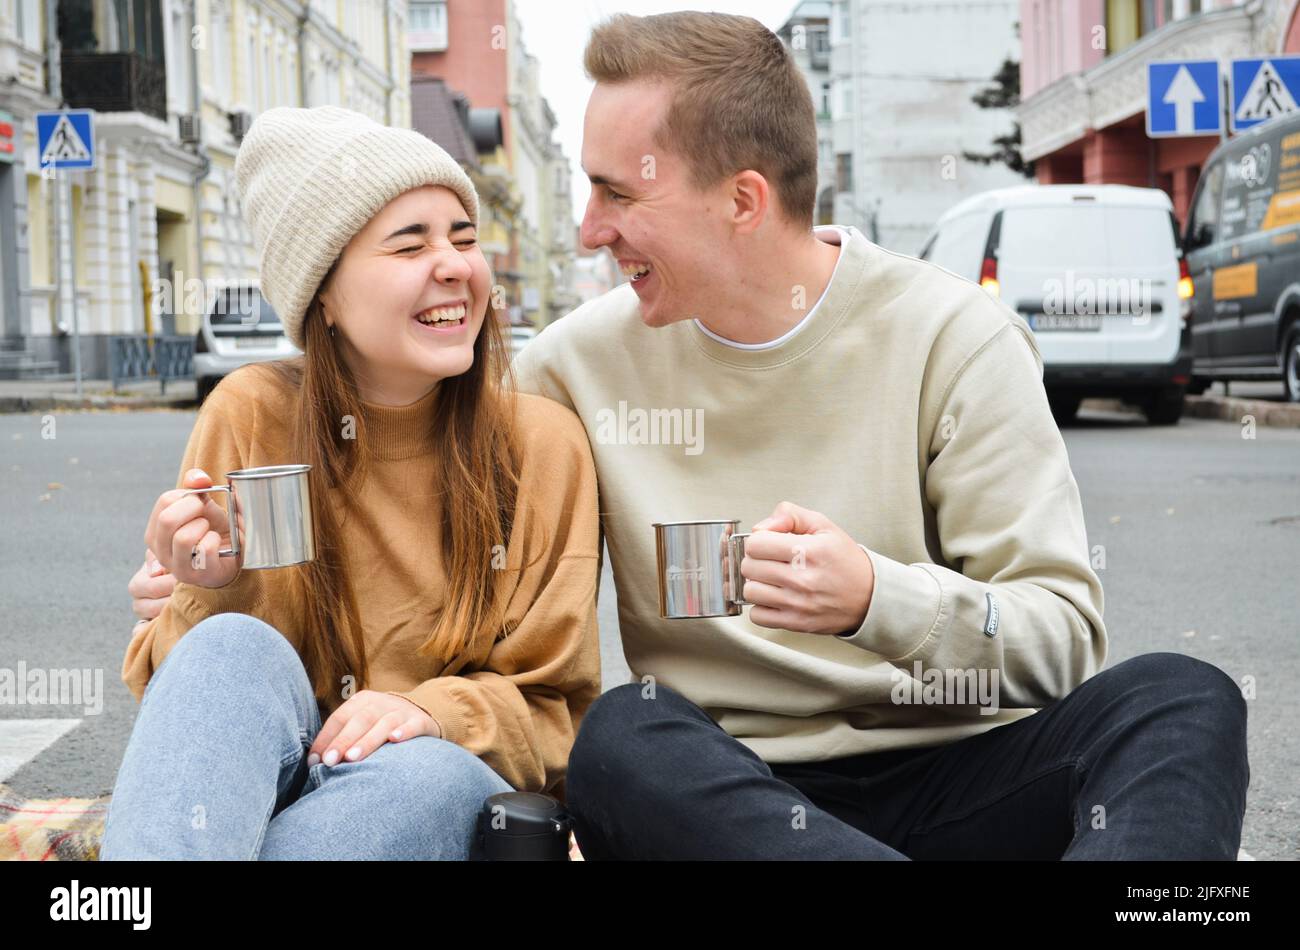 A couple in love id sitting on the road and drinking some tea Stock Photo